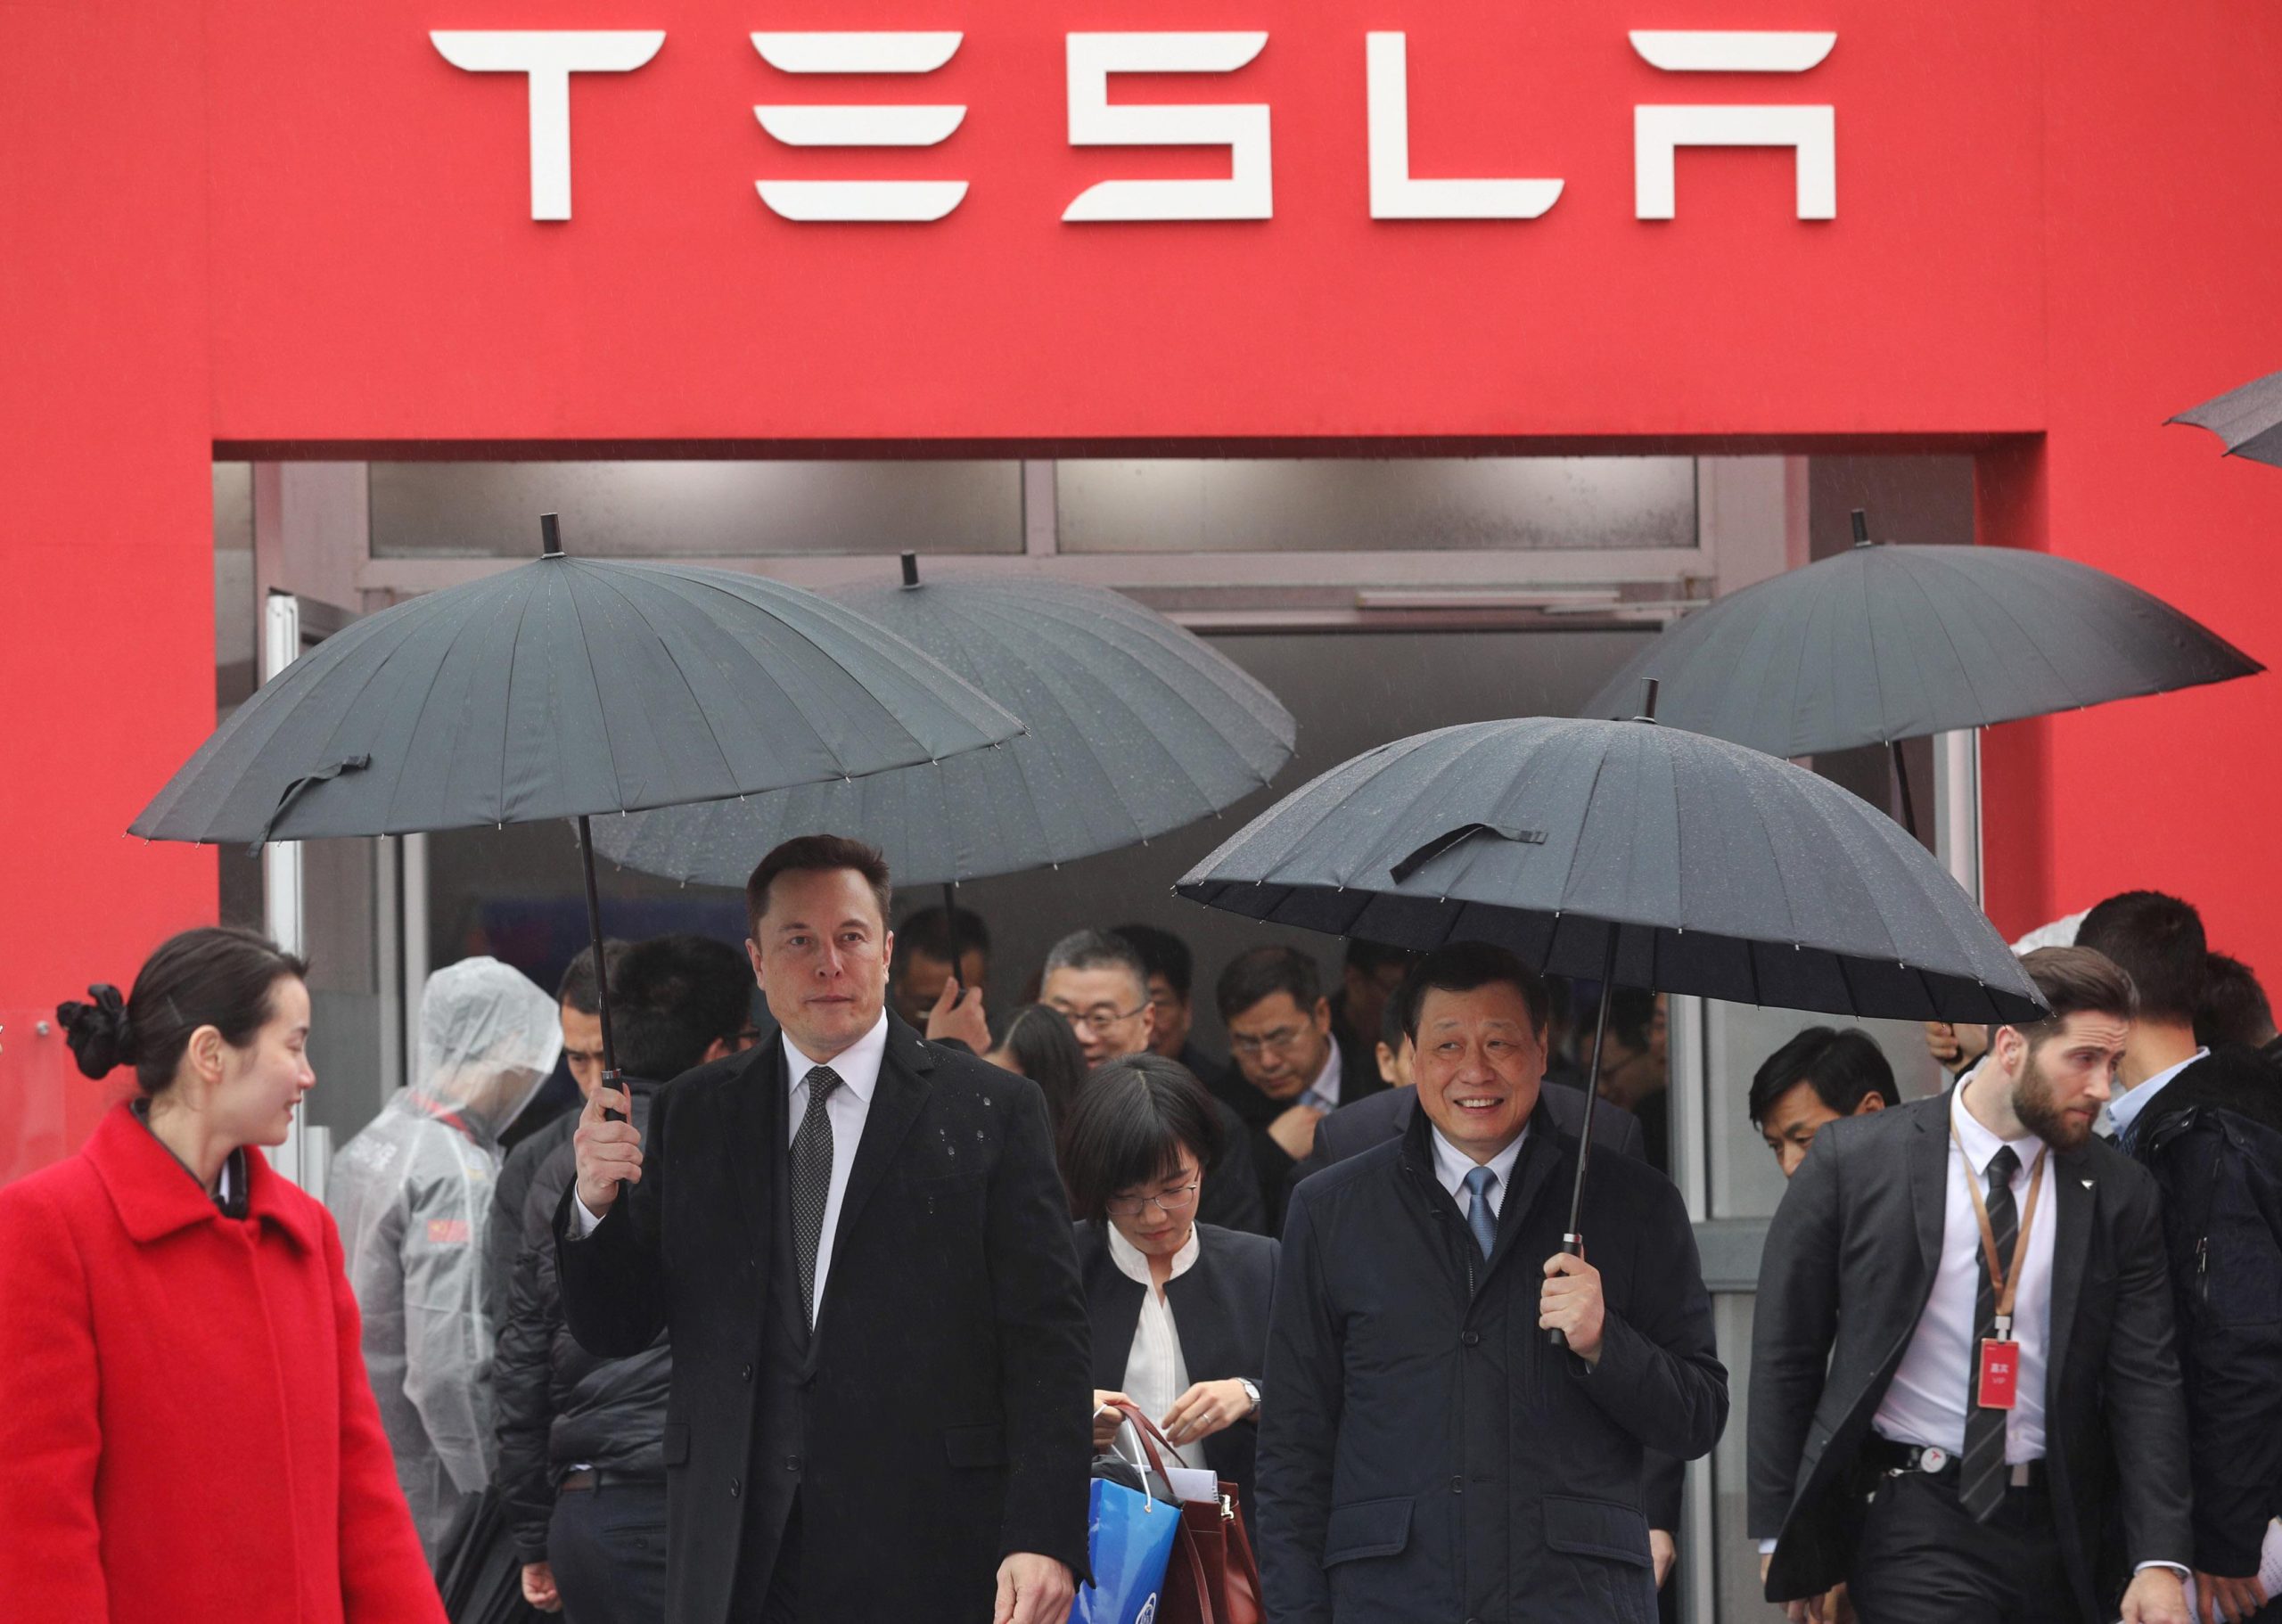 Tesla’s Shanghai workers will sleep in the factory to restart production during strict COVID-19 lockdowns